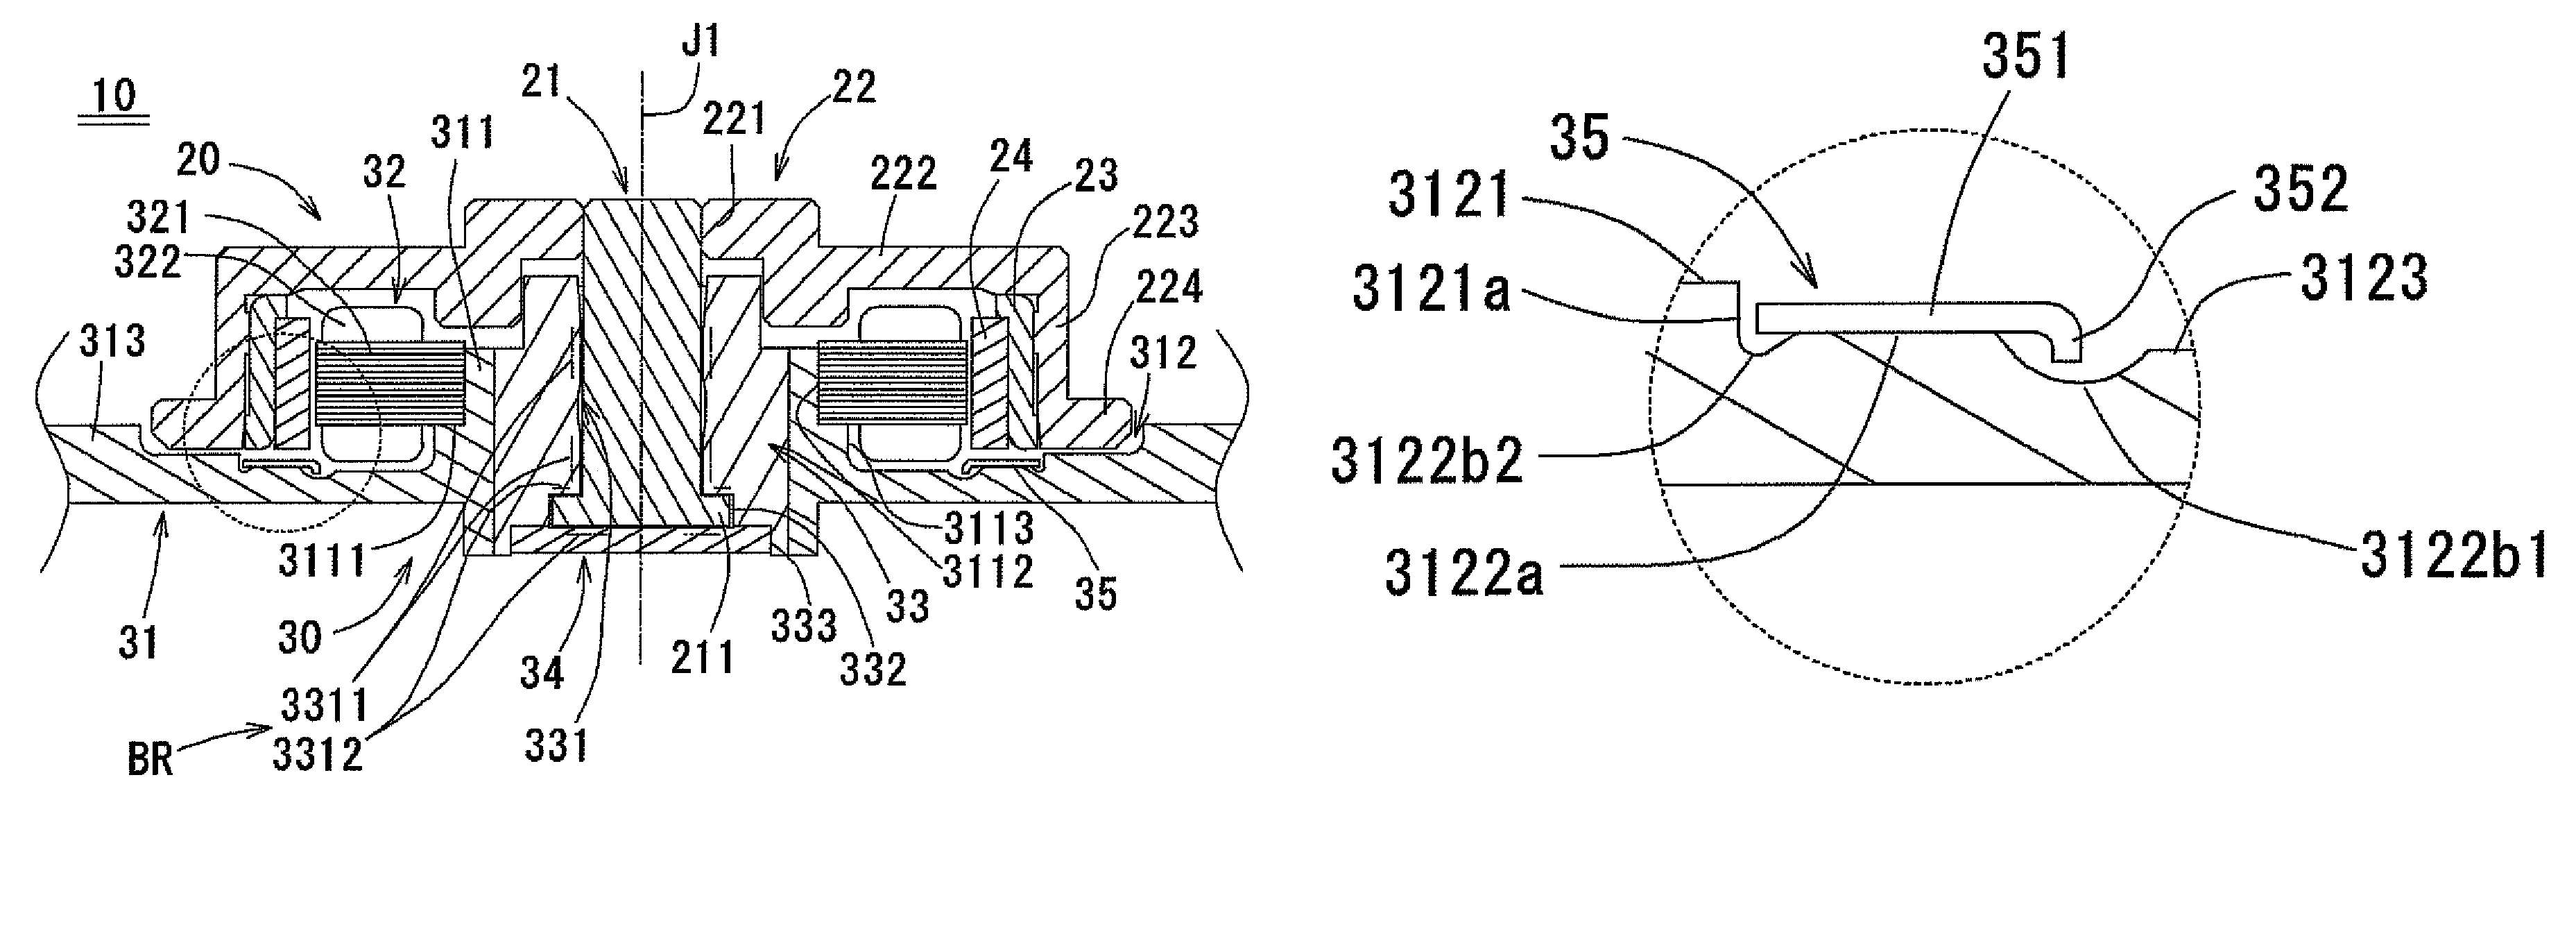 Motor and disk drive using the same